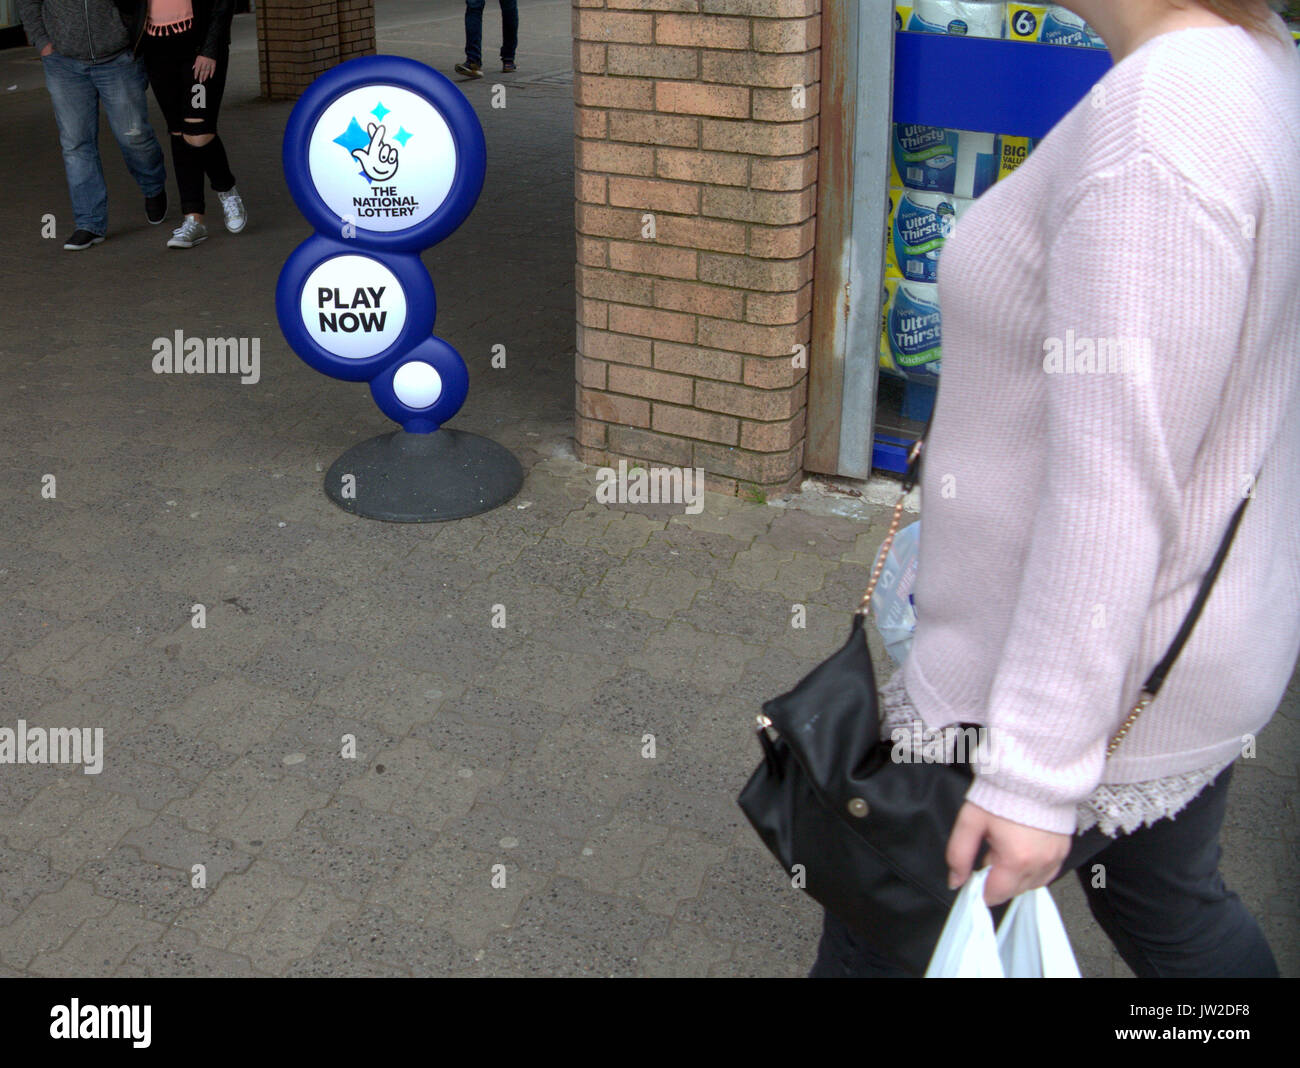 the national lottery lotto street sign people hidden face Stock Photo